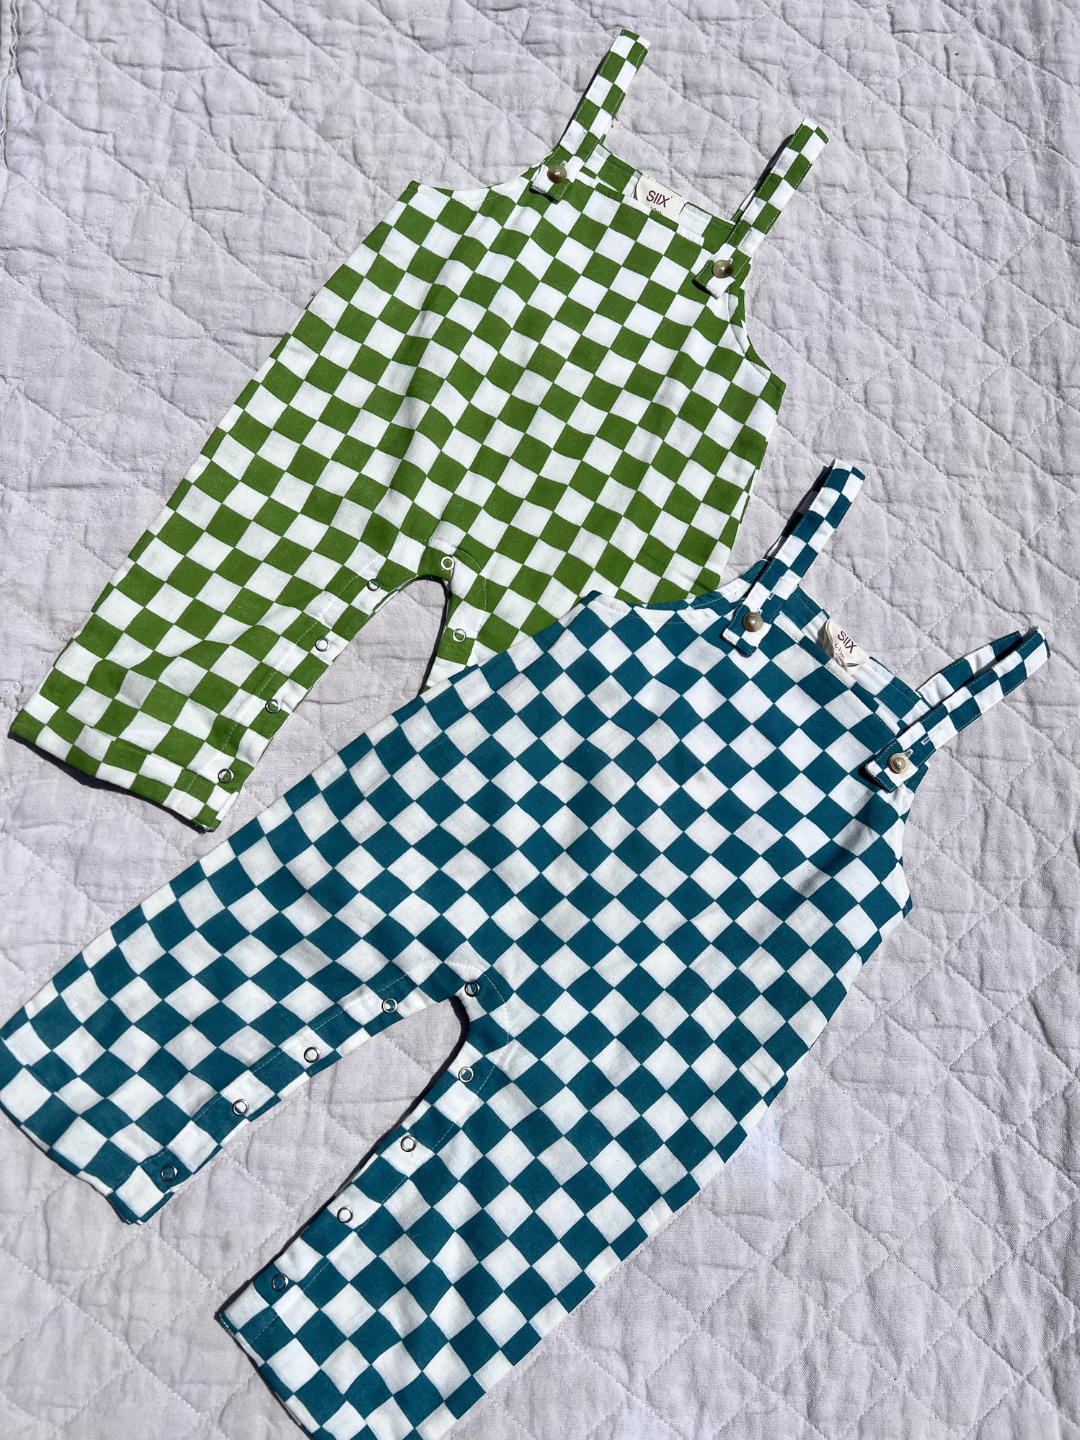 Two pairs of kids' overalls laid on a quilt; one in grass green and white check, the other aquamarine and white